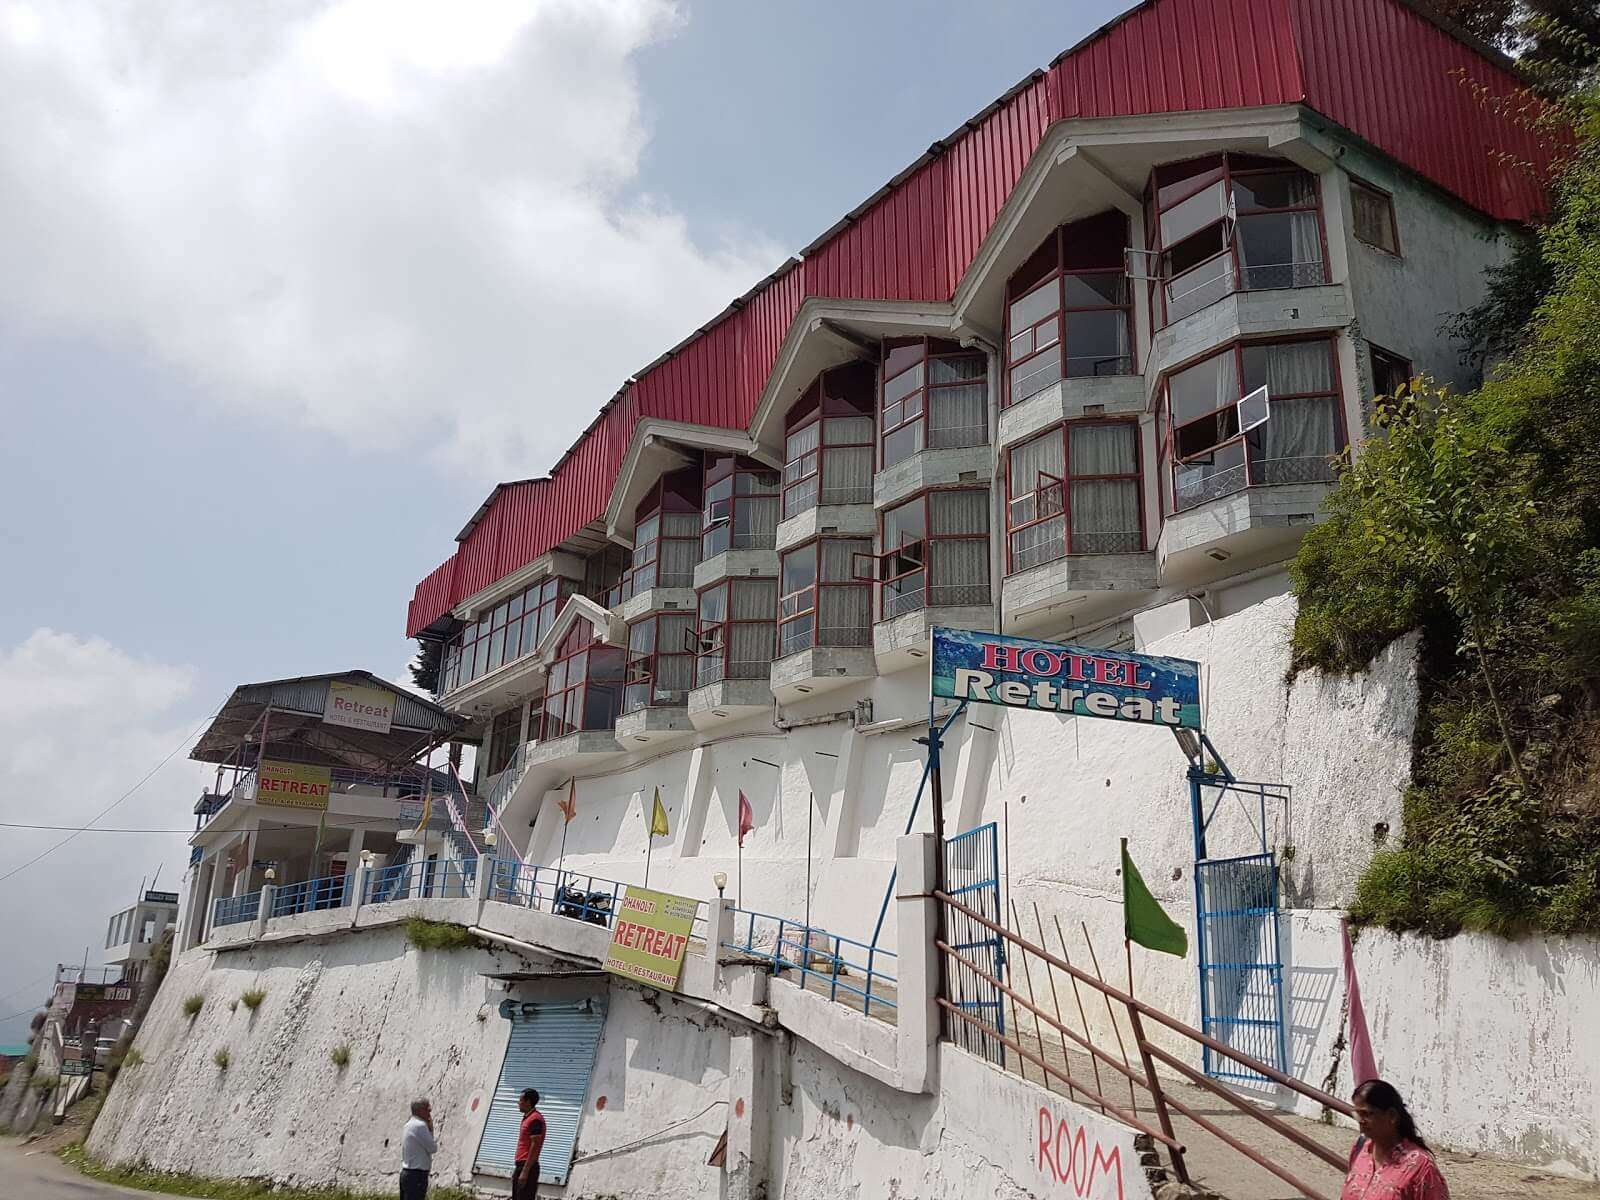 A view of an old hotel in Dhanaulti